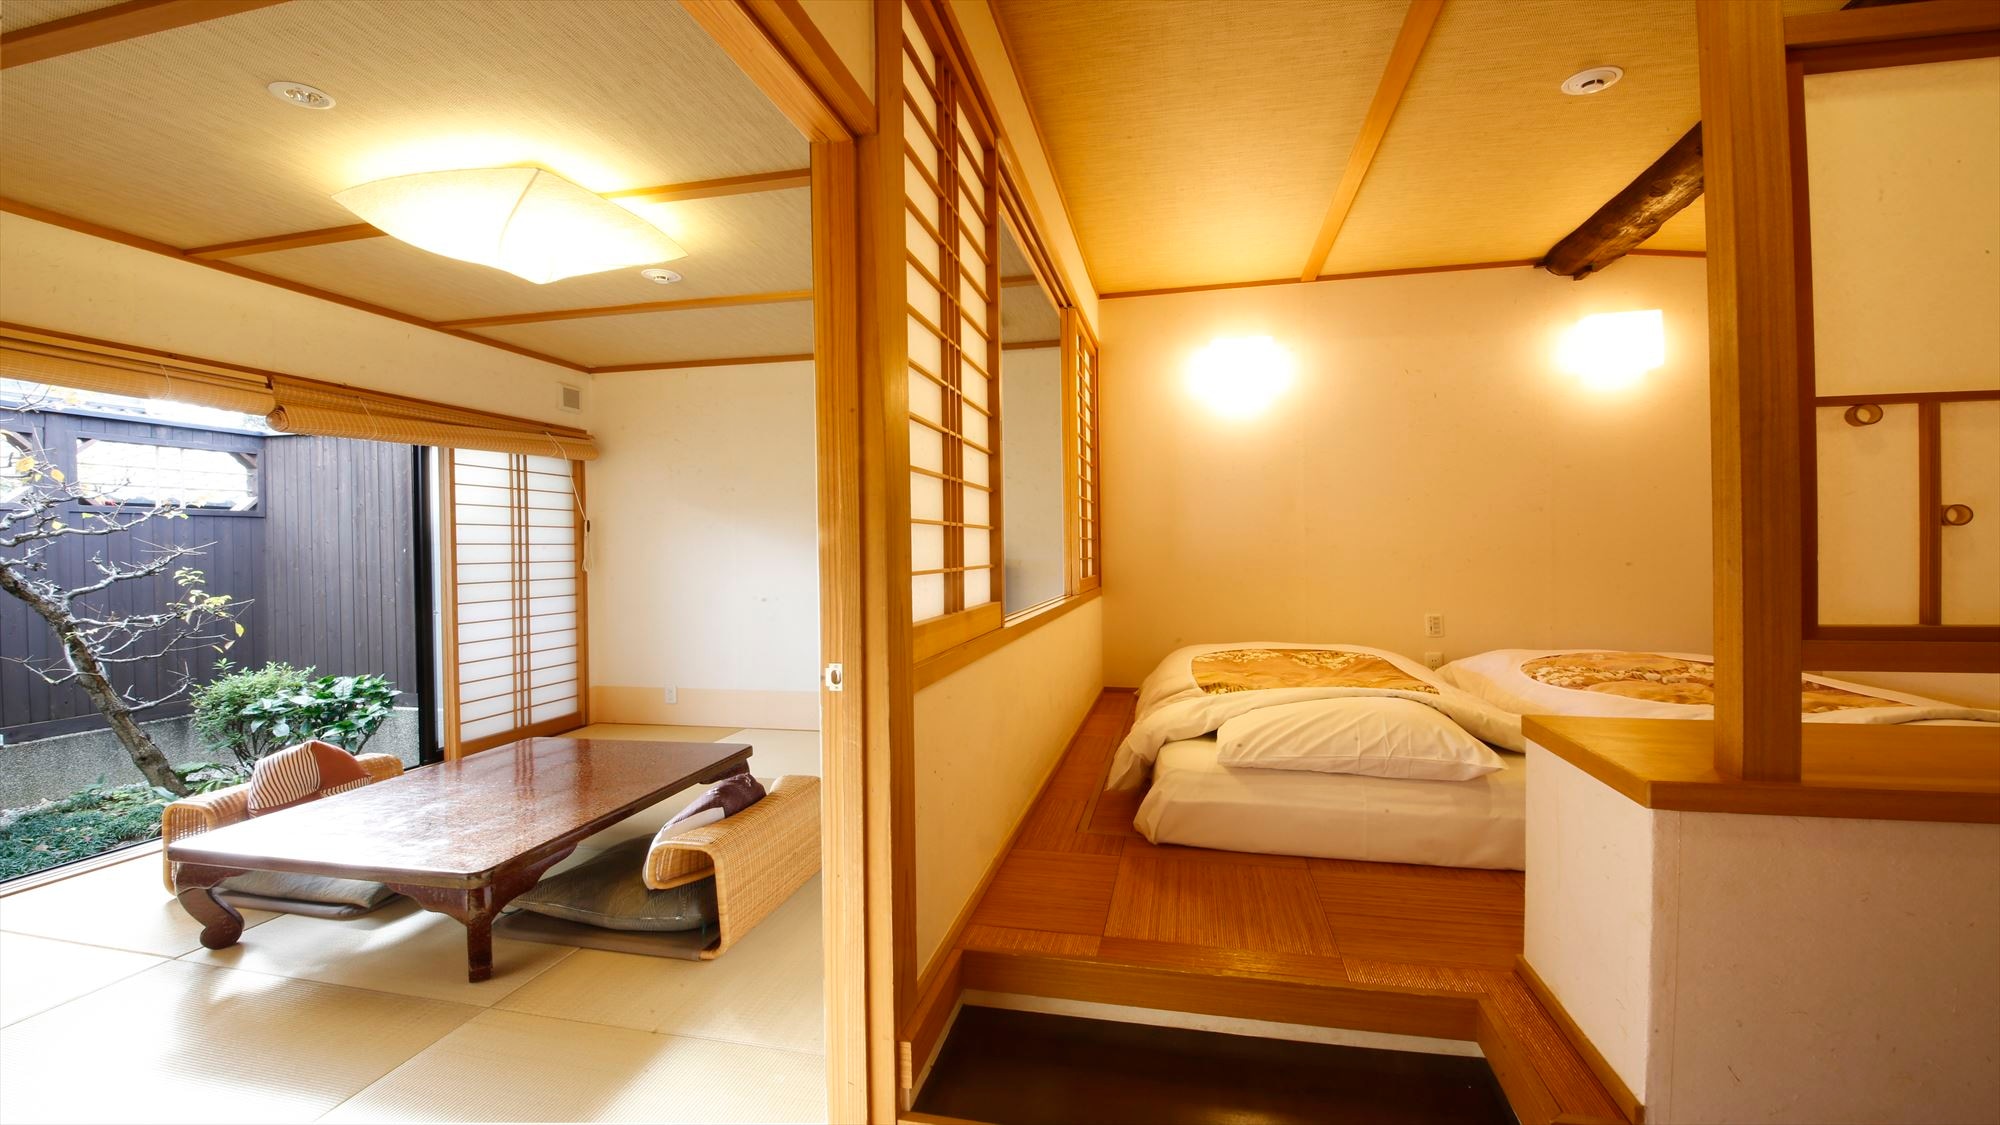 Kanaru Sanso is a room with an open-air plum blossom bath. It is a 12 tatami room divided into two rooms.